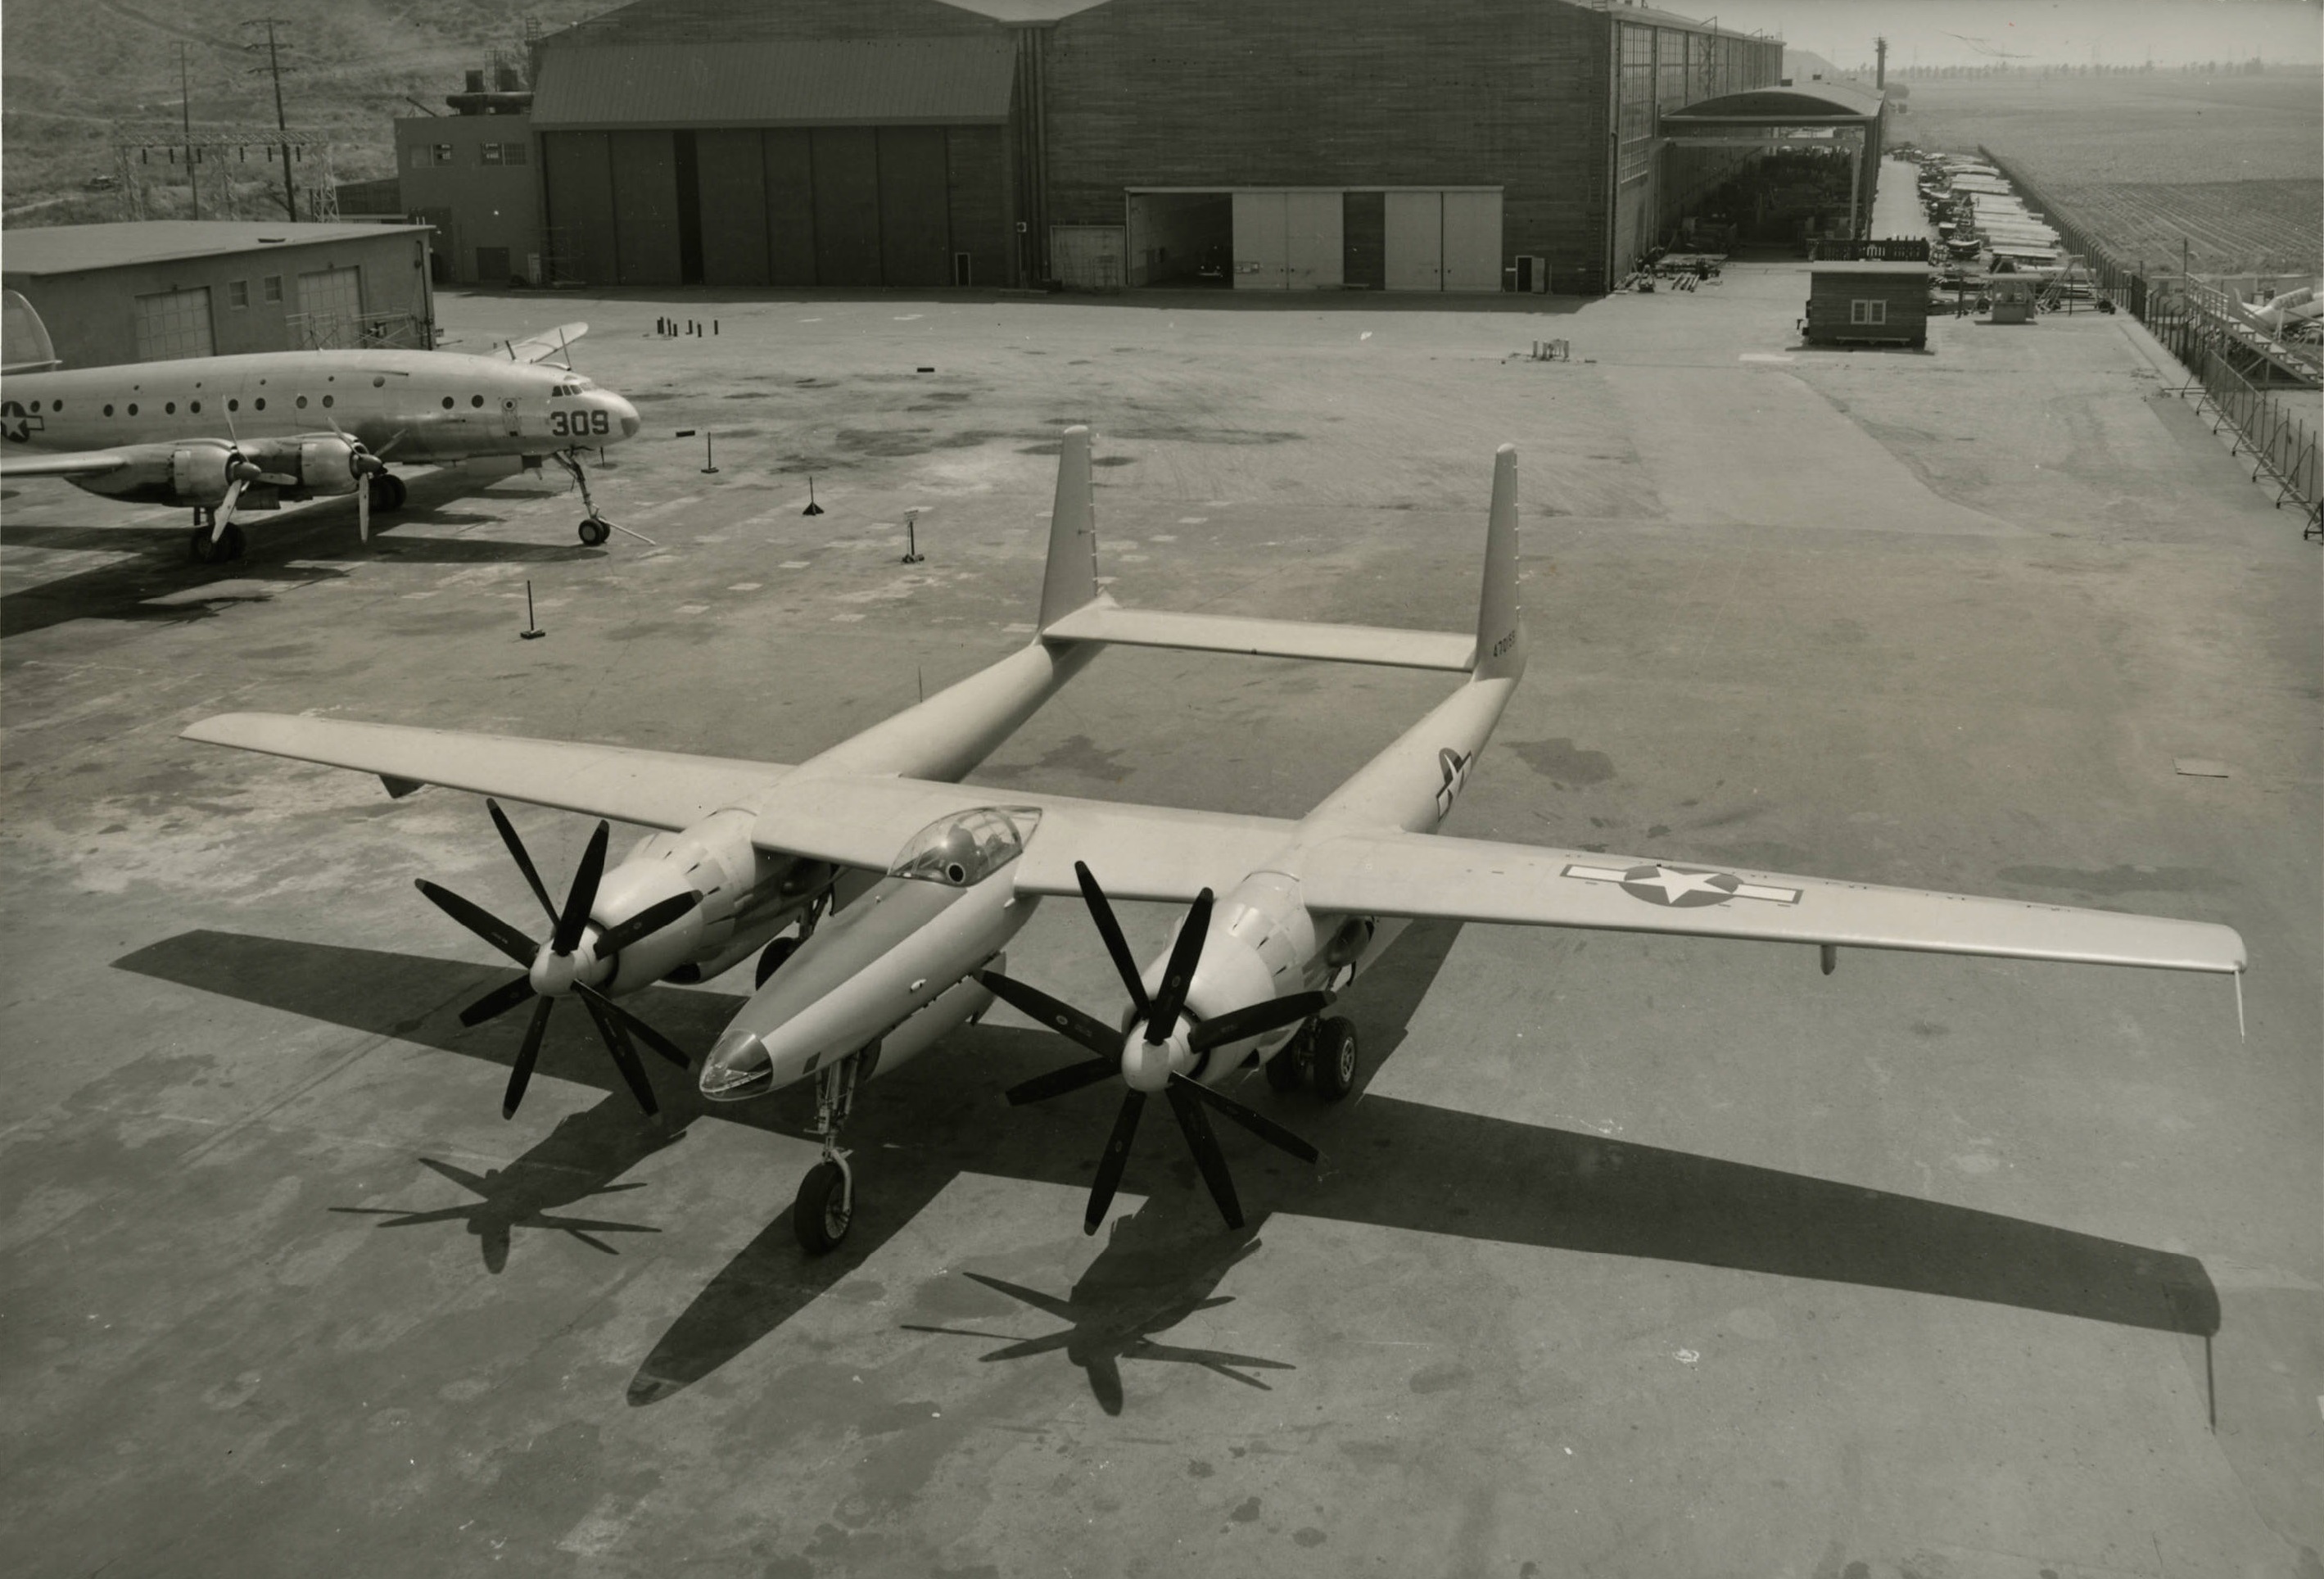 Hughes XF-11 44-70155 at Culver City, California, 7 July 1946. A Lockheed C-69 Constellation is in the background. (University of Nevada, Las Vegas Libraries)